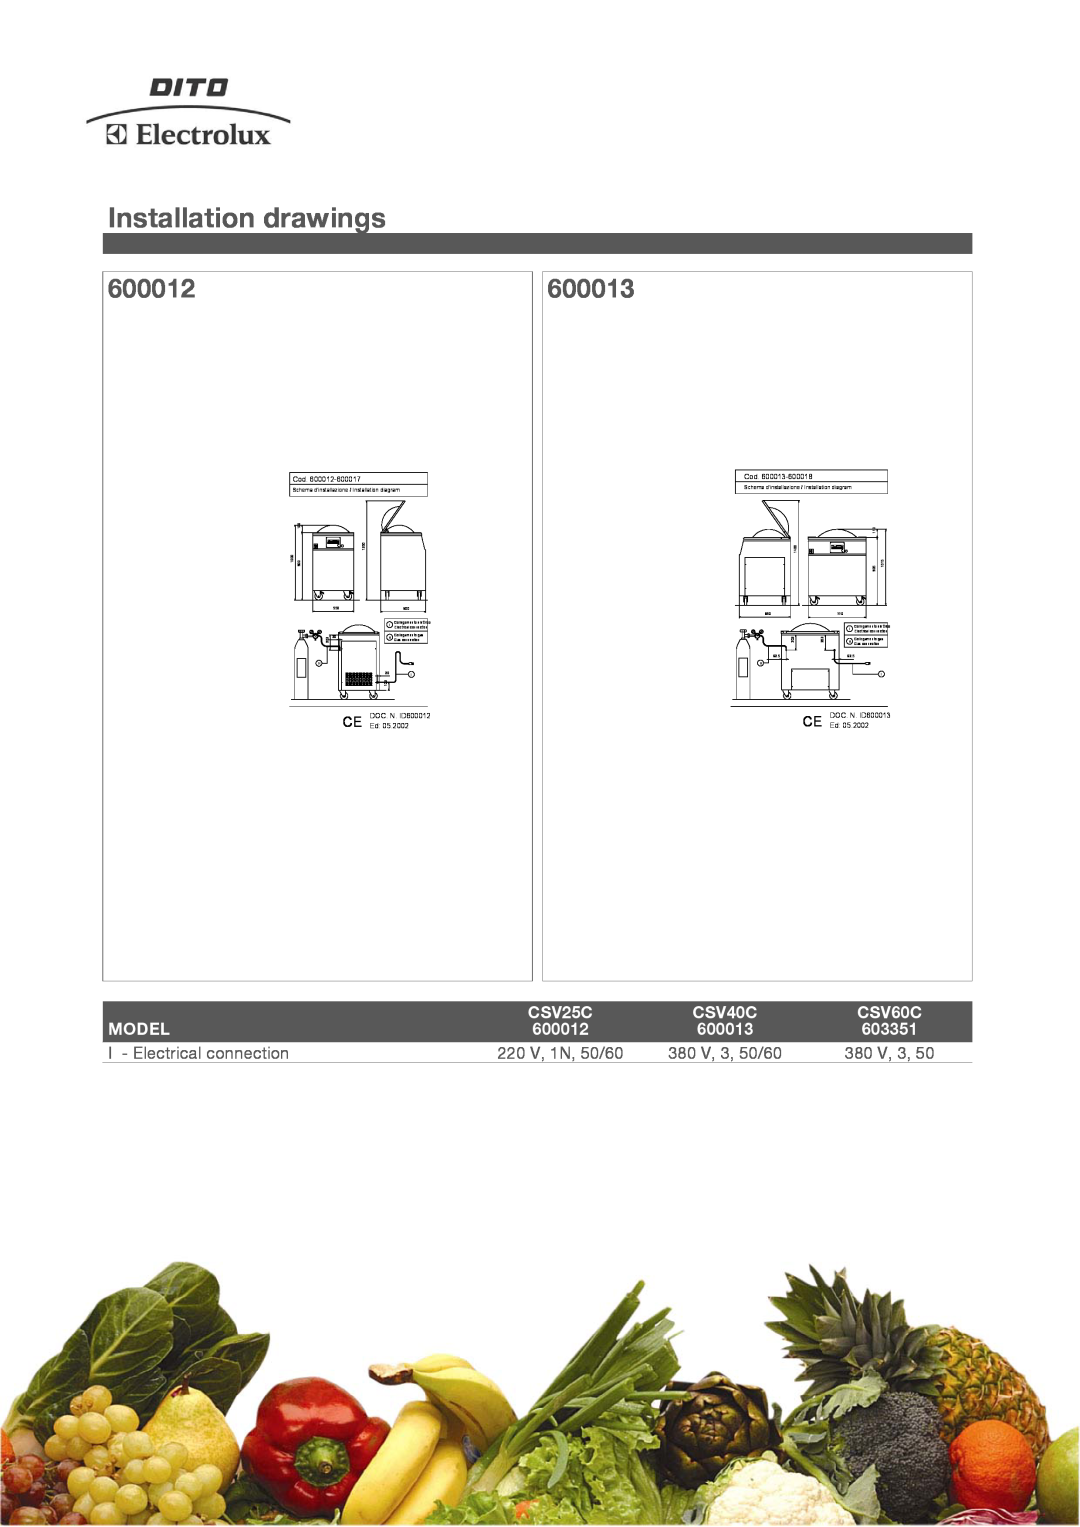 Electrolux 603351 manual Installation drawings, 600012, 600013, CSV25C, CSV40C, CSV60C, Model, I - Electrical connection 